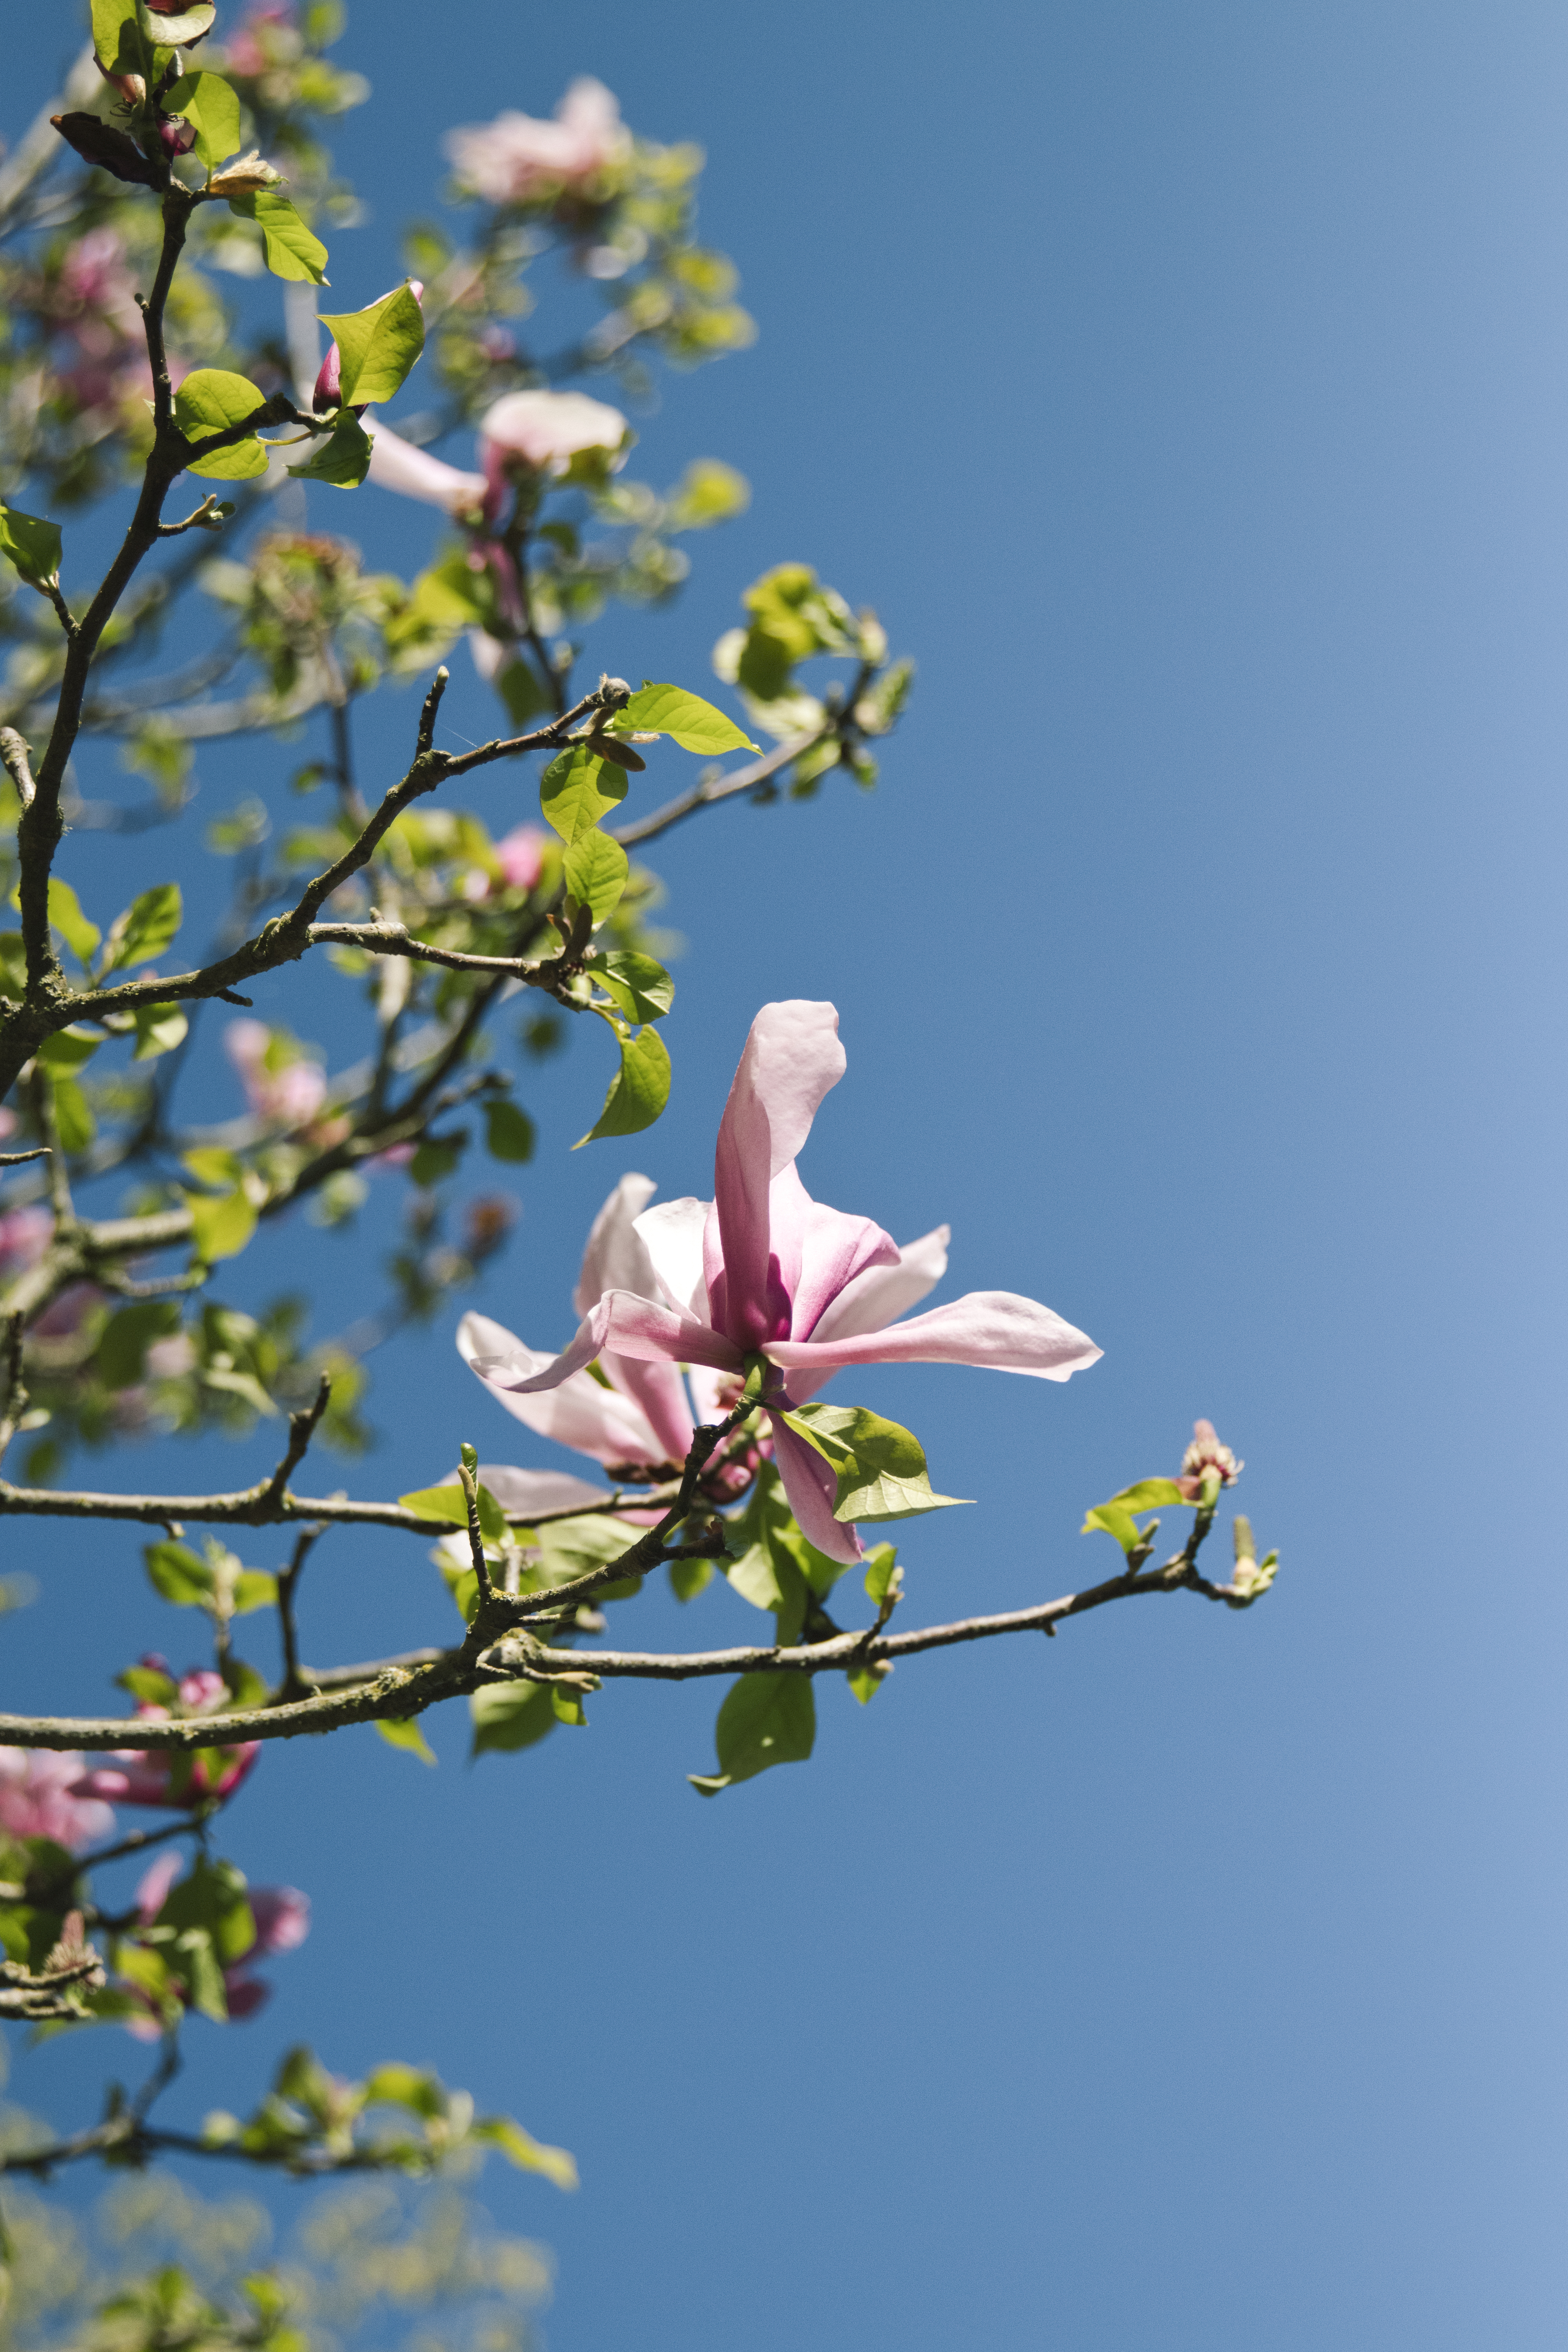 blooming-magnolia-blossoms-on-tree-silhouetted-against-clear-blue-sky